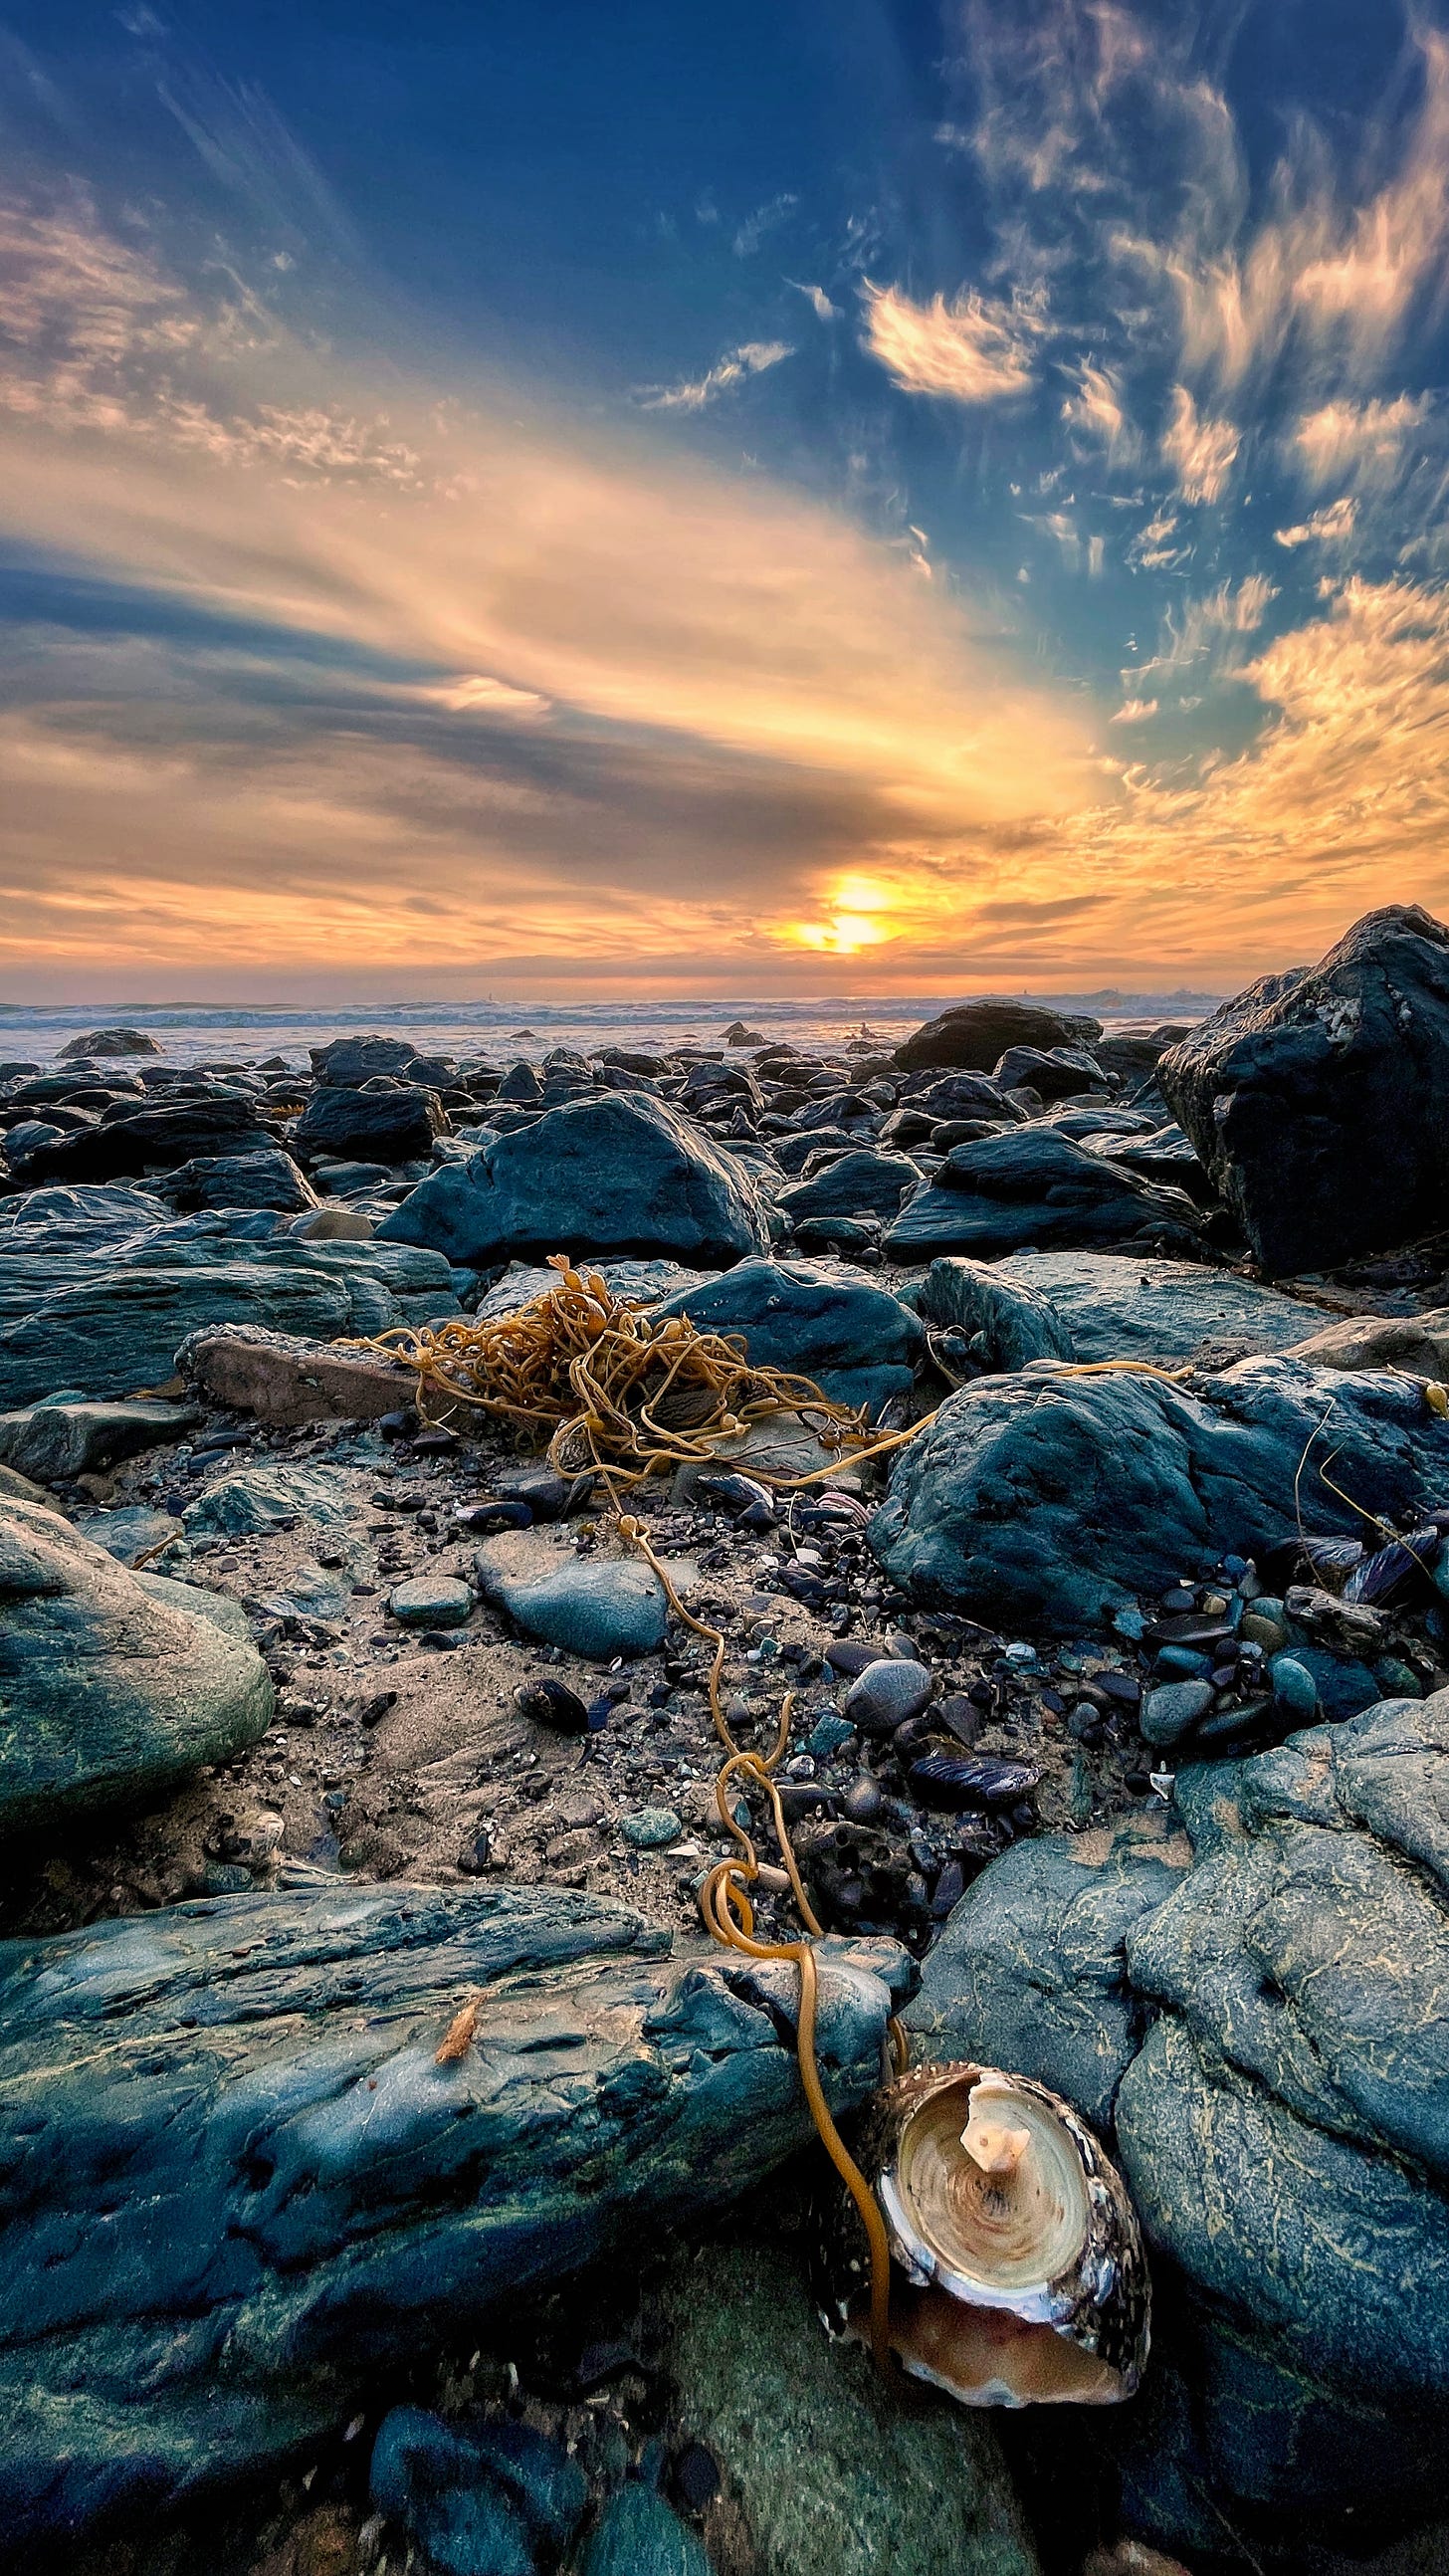 sunset at beach in tidepools